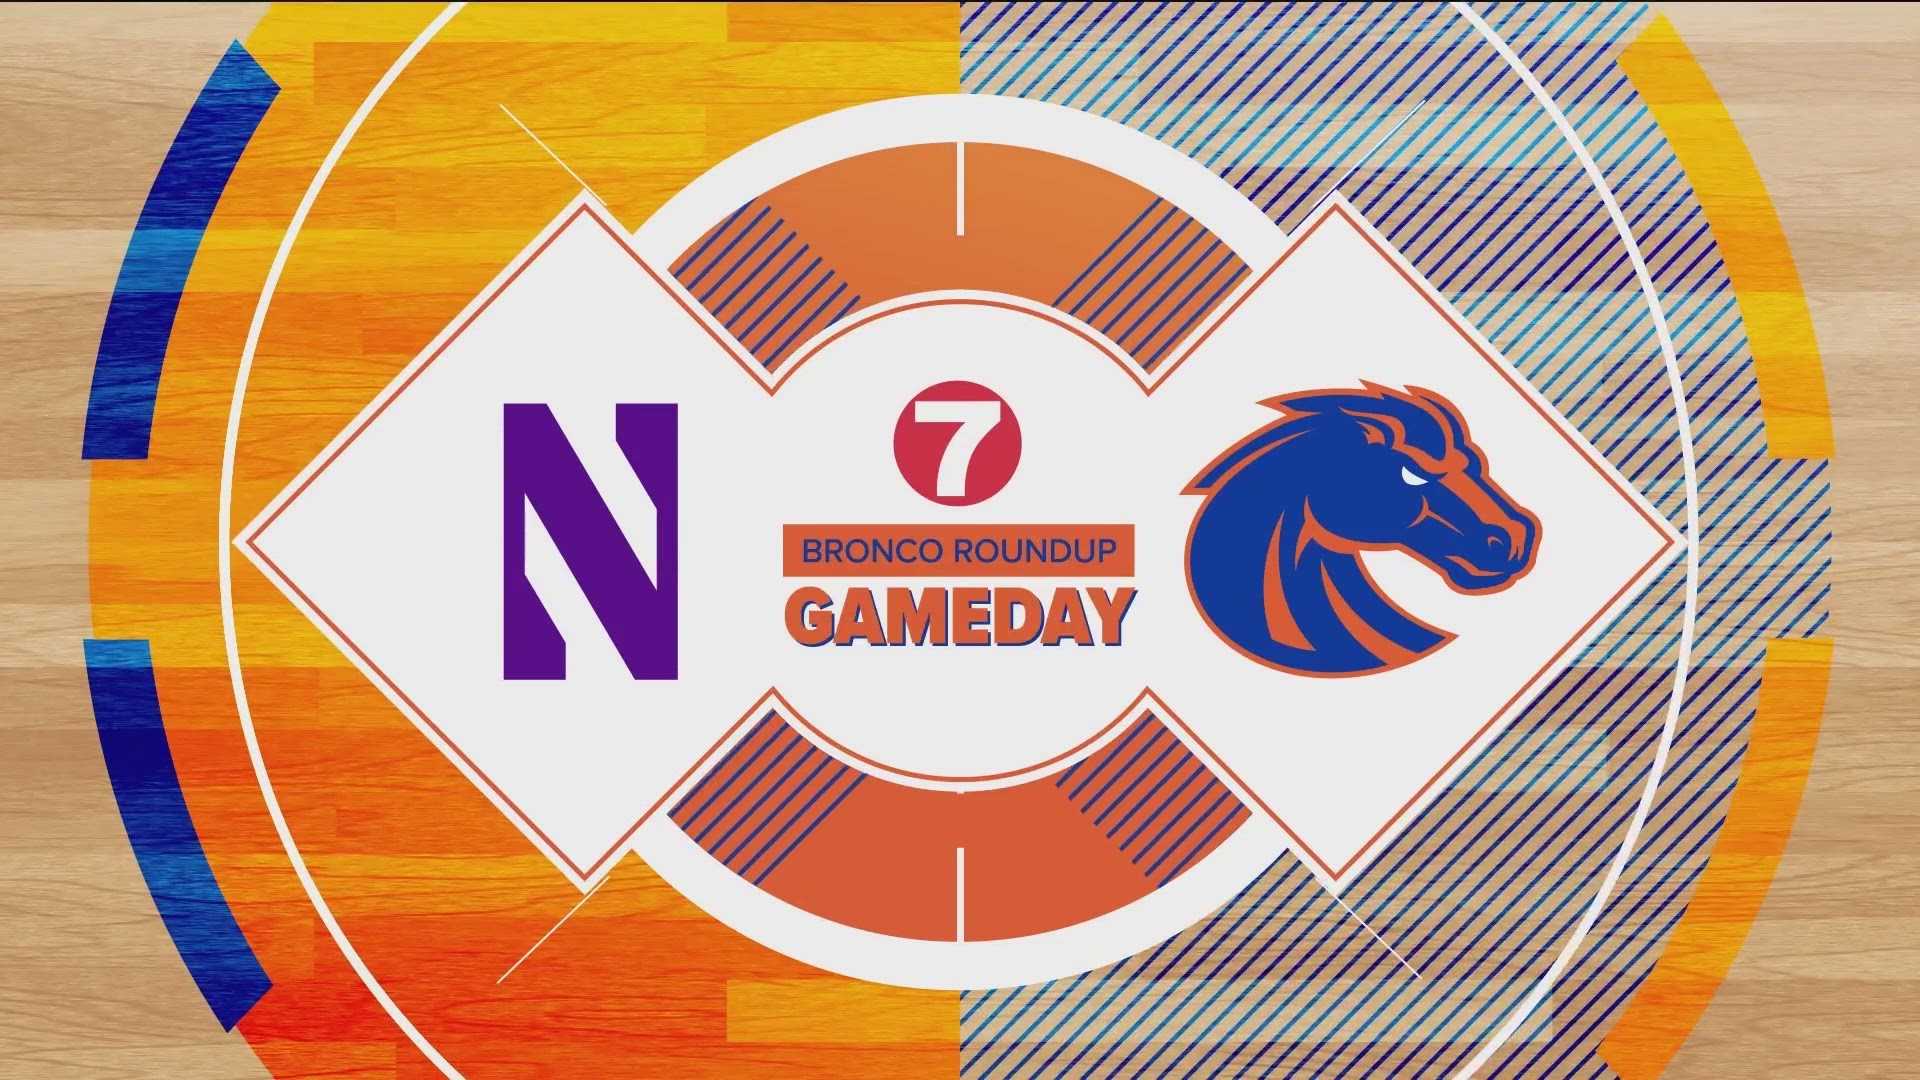 KTVB Sports Director Jay Tust and sports reporter Brady Frederick go live in Sacramento to preview Boise State's NCAA Tournament bout against Northwestern.